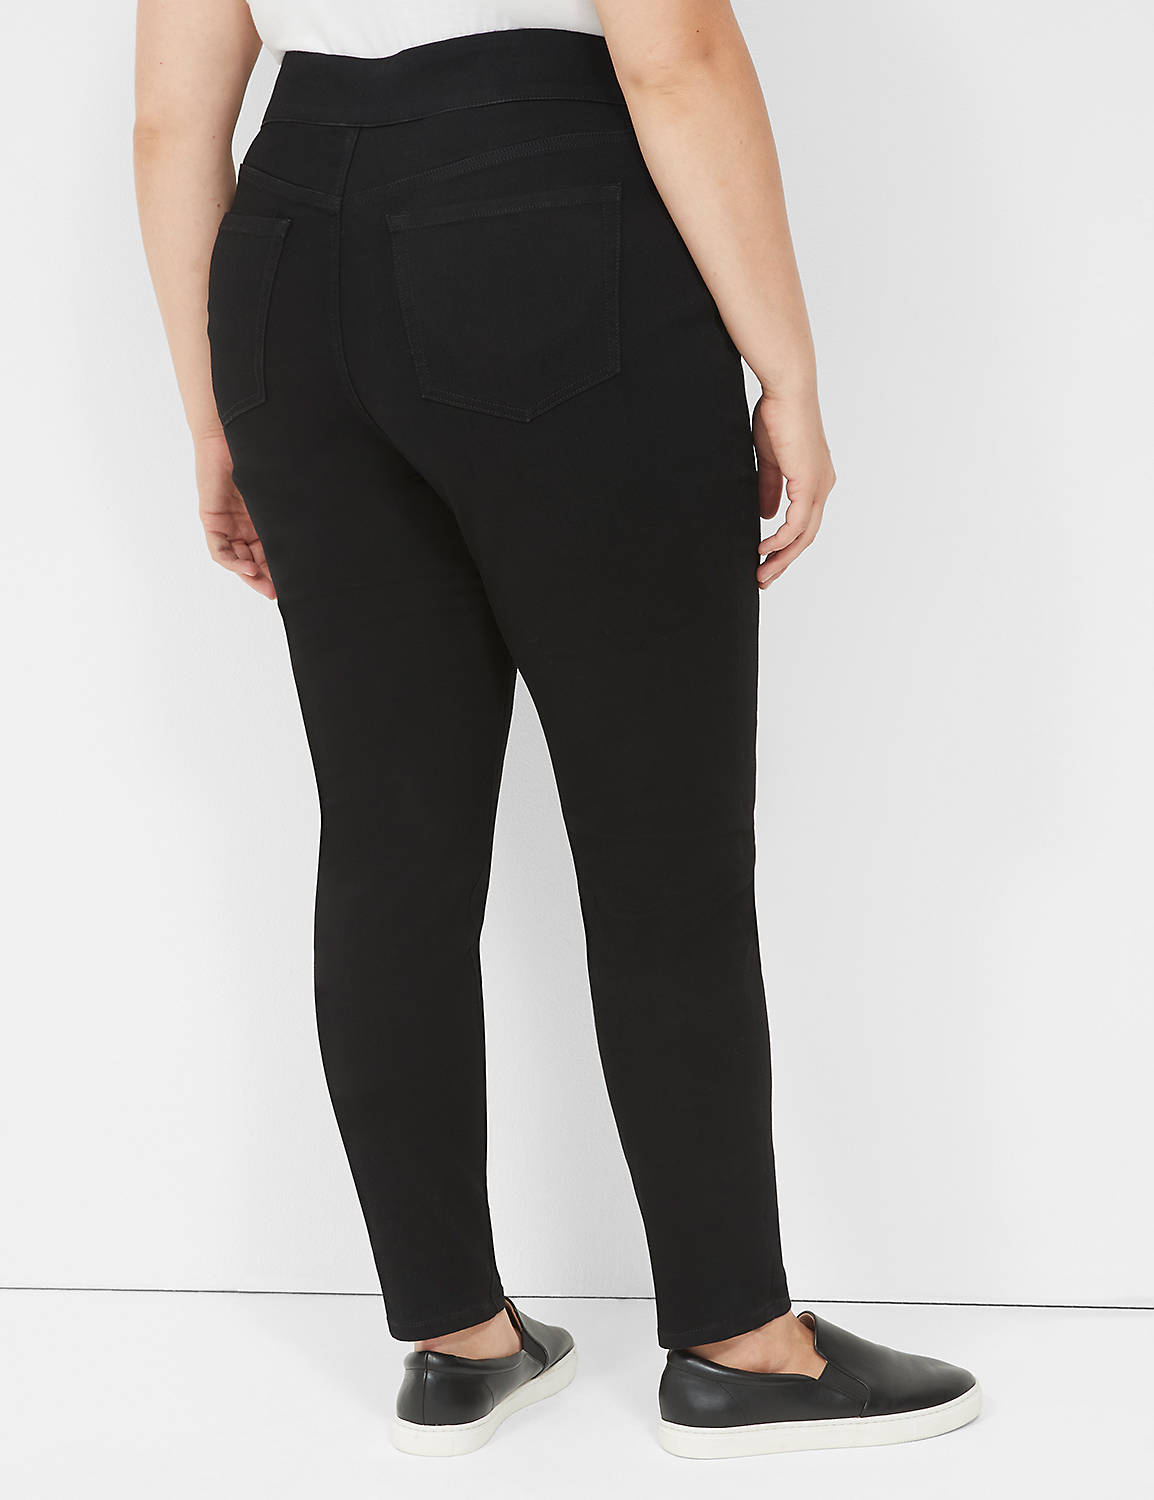 SIGNATURE HIGH RISE PULL ON JEGGING Product Image 2